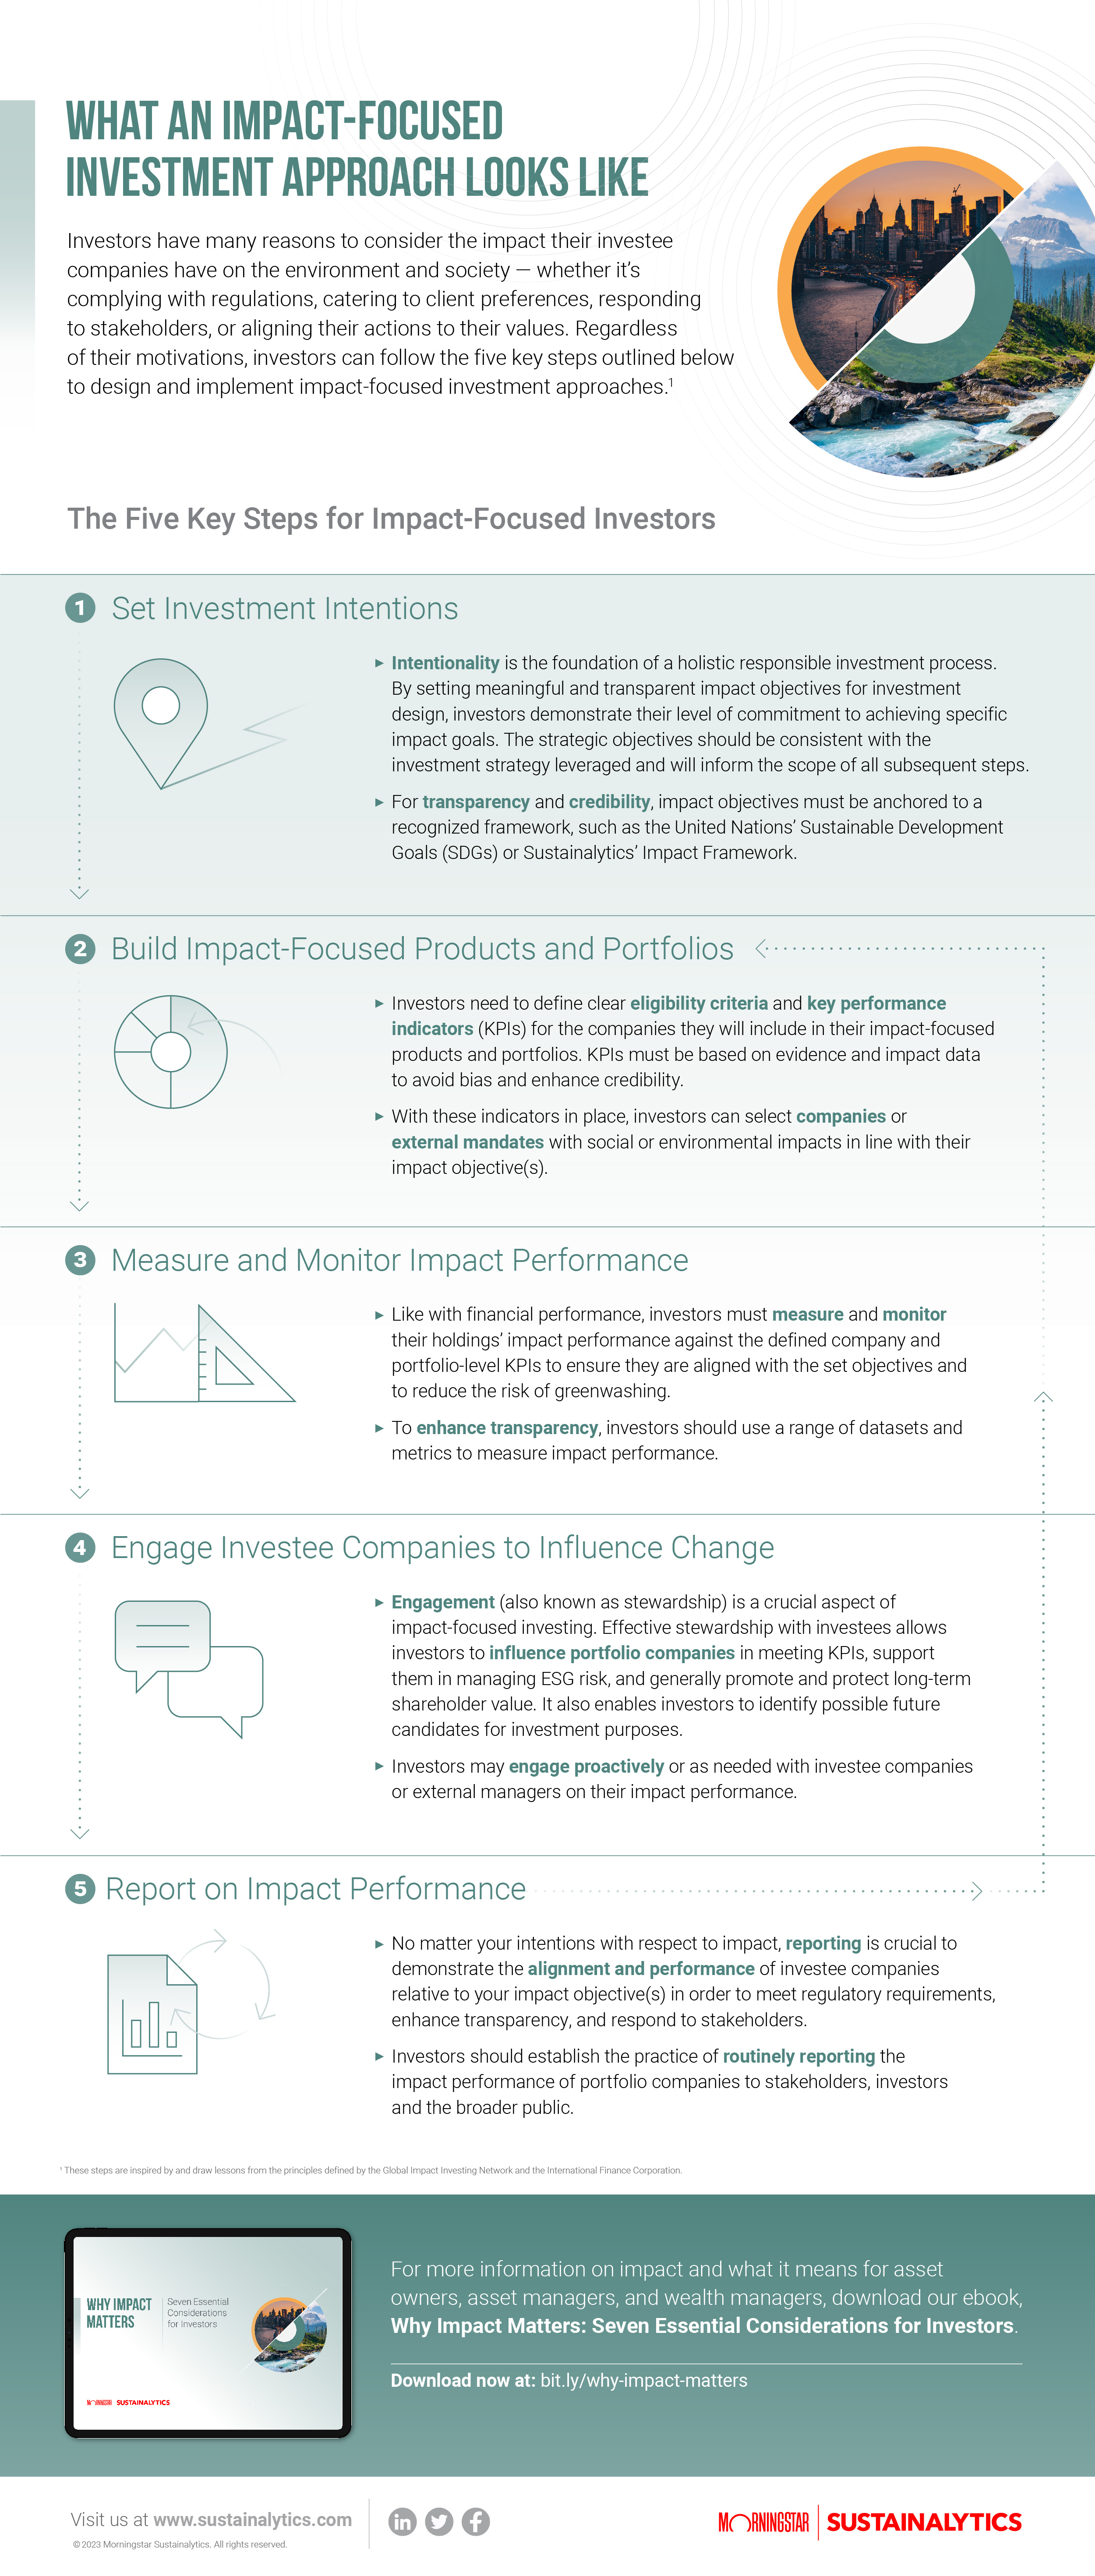 Discover how impact-focused investing works and how investors can develop an impact-focused investment approach that integrates into their existing strategies